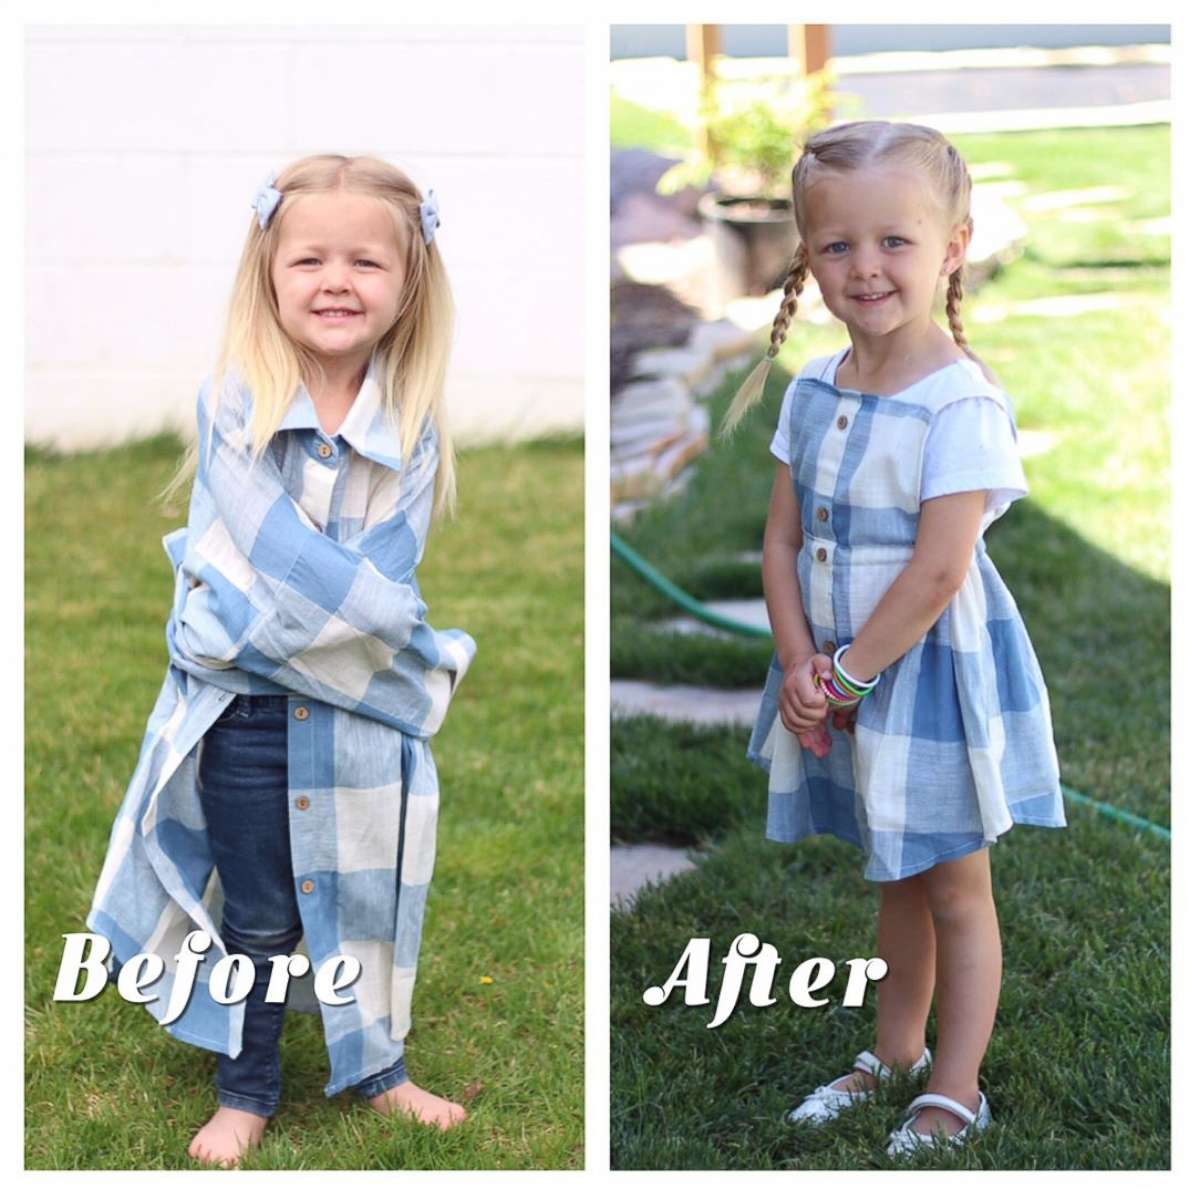 PHOTO: Stephanie Miller of Salt Lake City, Utah, makes dresses for her daughters out of husband's old shirts.